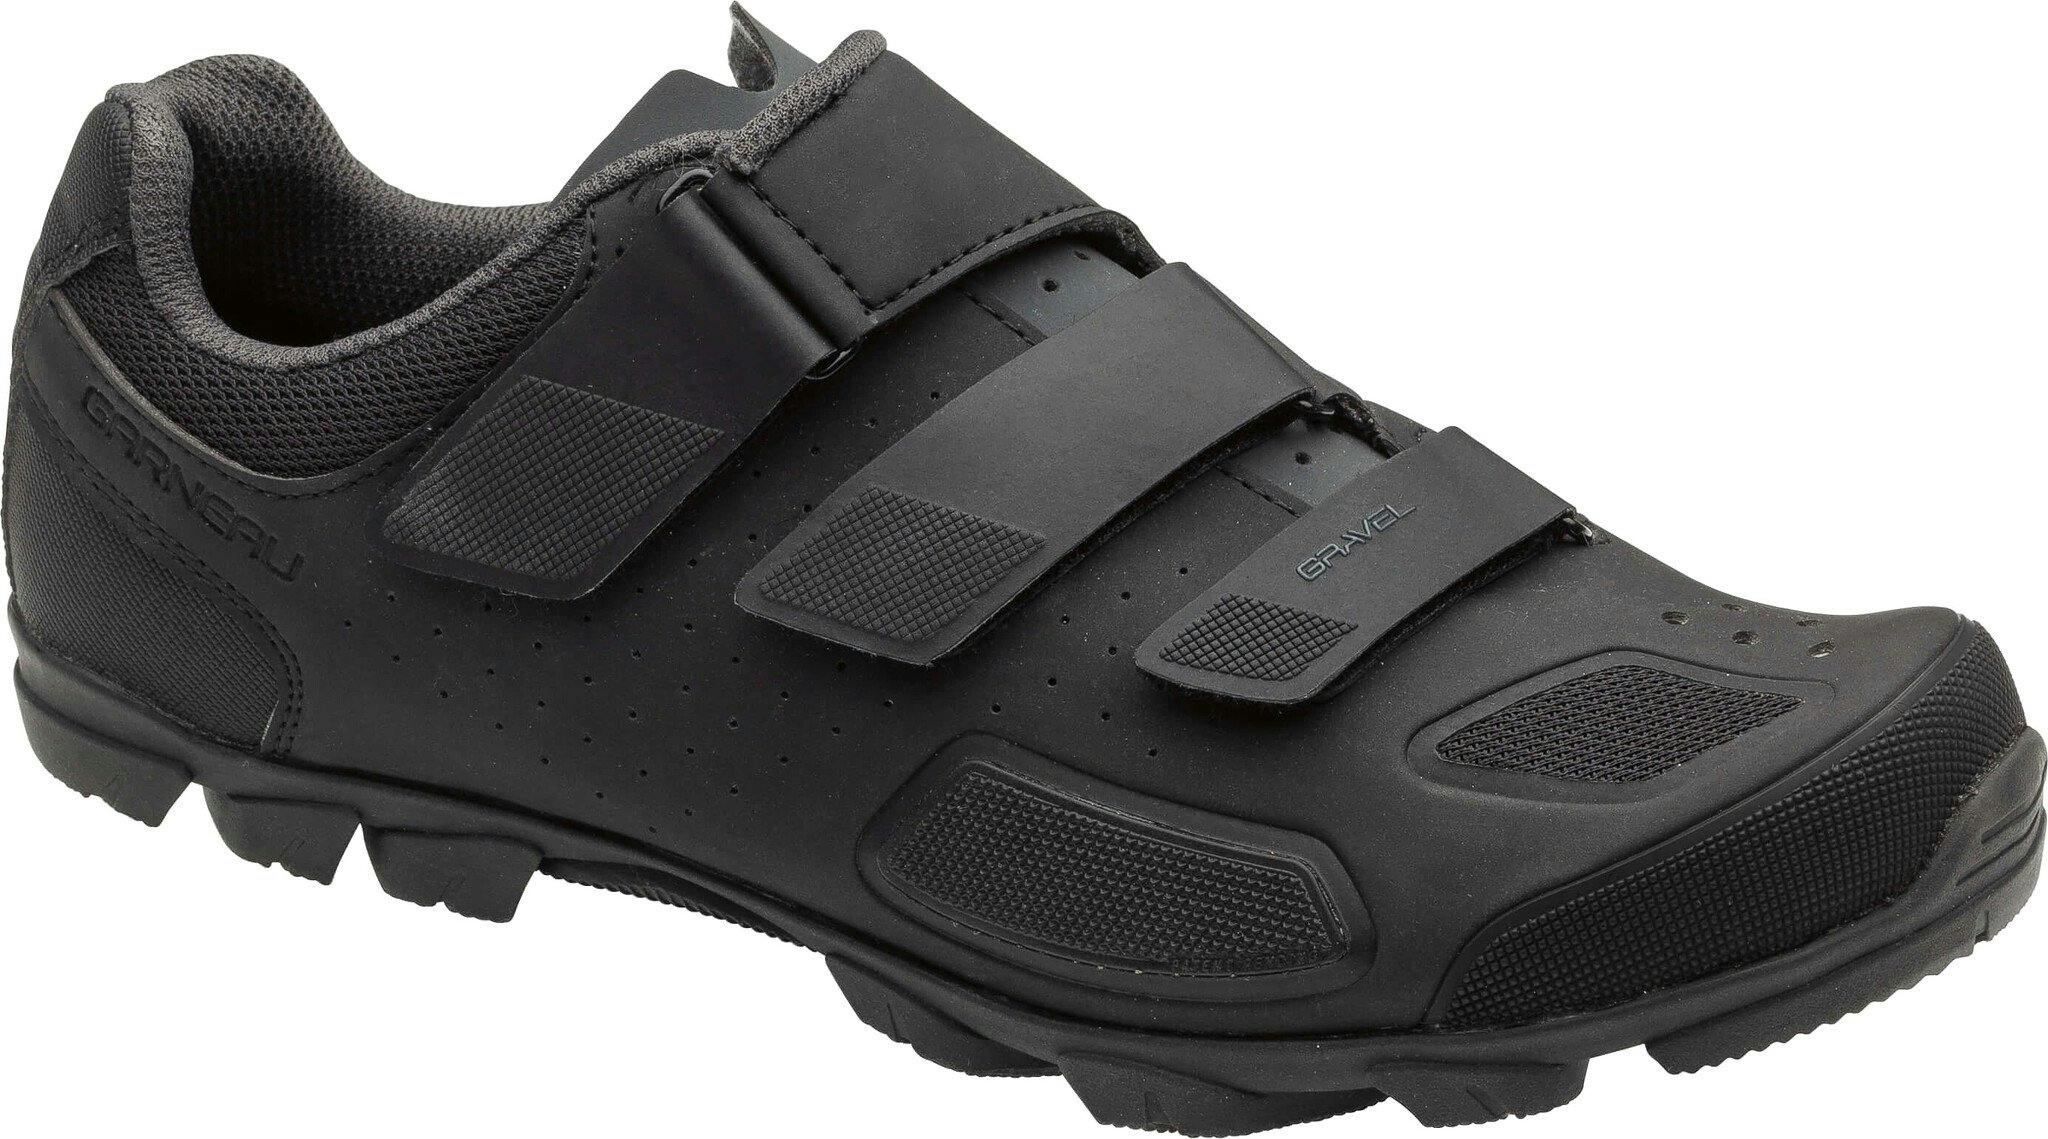 Product image for Gravel II Cycling Shoes - Men's